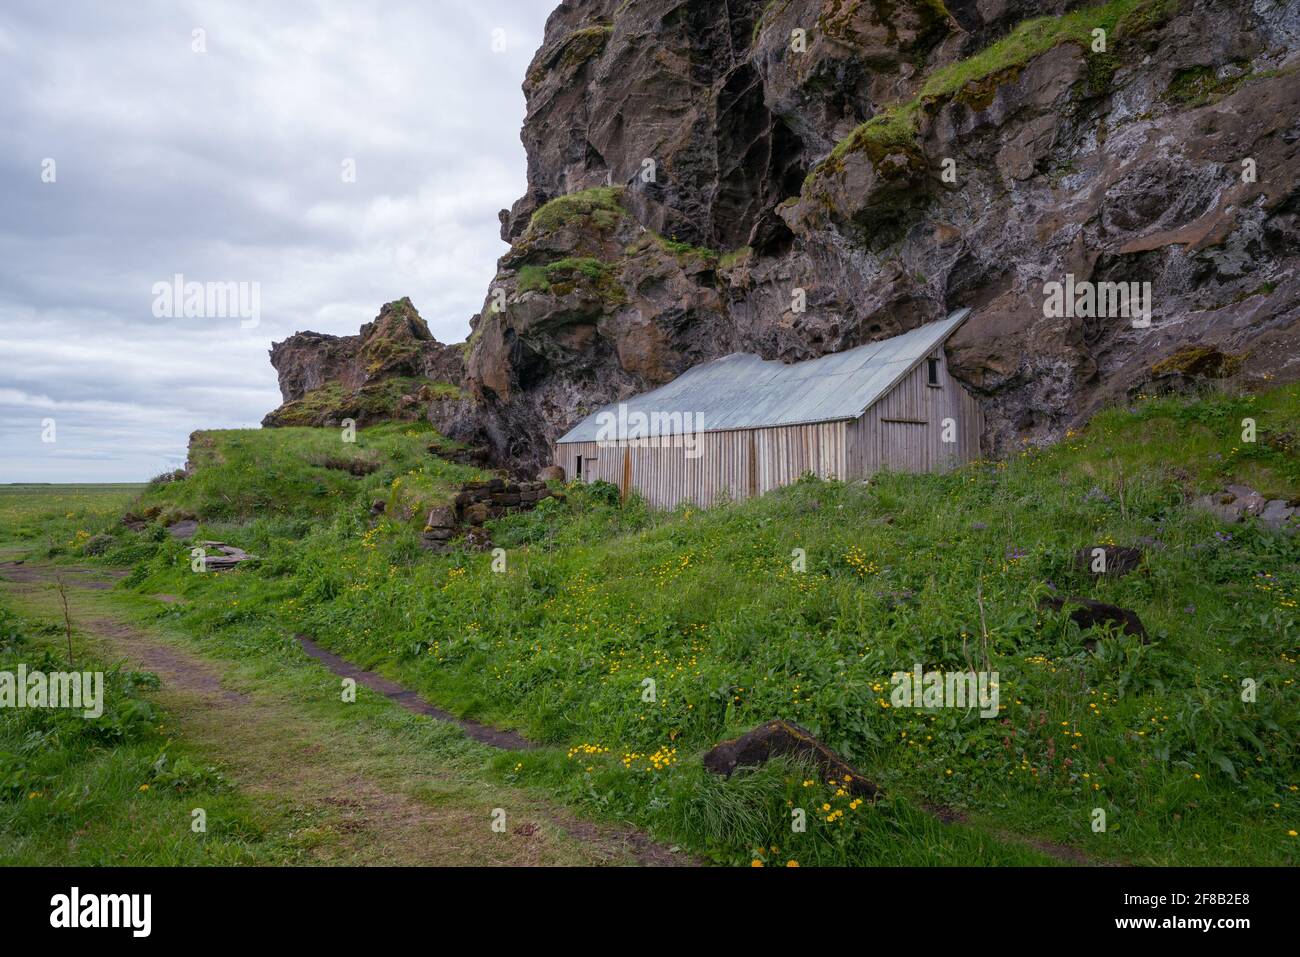 House built into volcanic rock in Southern Iceland. Cloudy day, grass in the foreground. Stock Photo